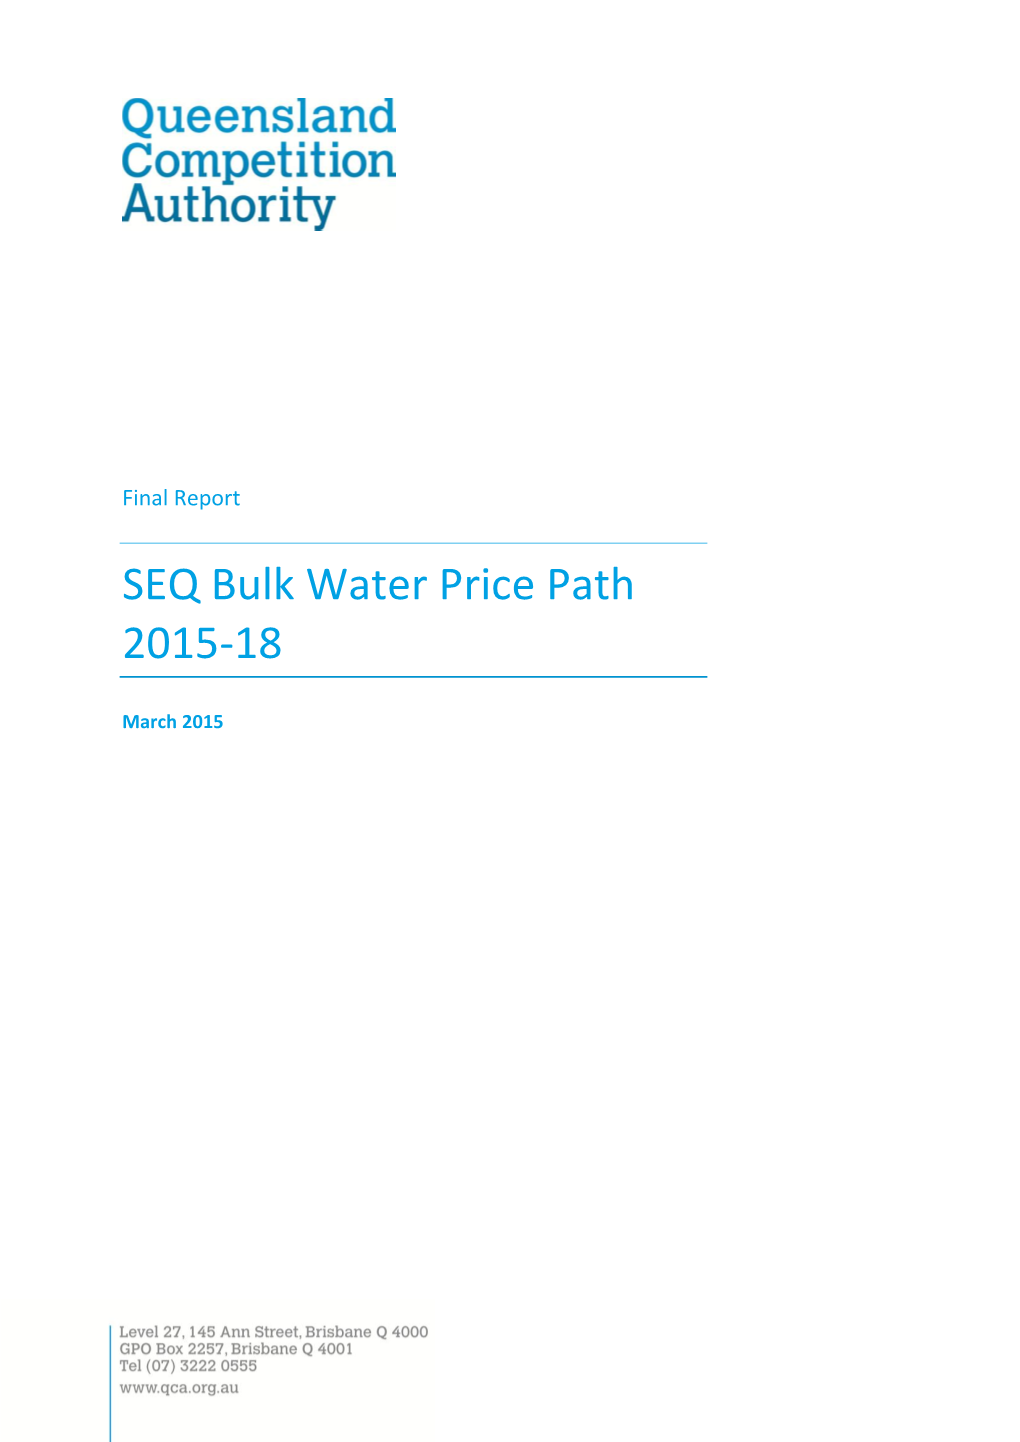 Seqwater Bulk Water Prices 2015-2018, July